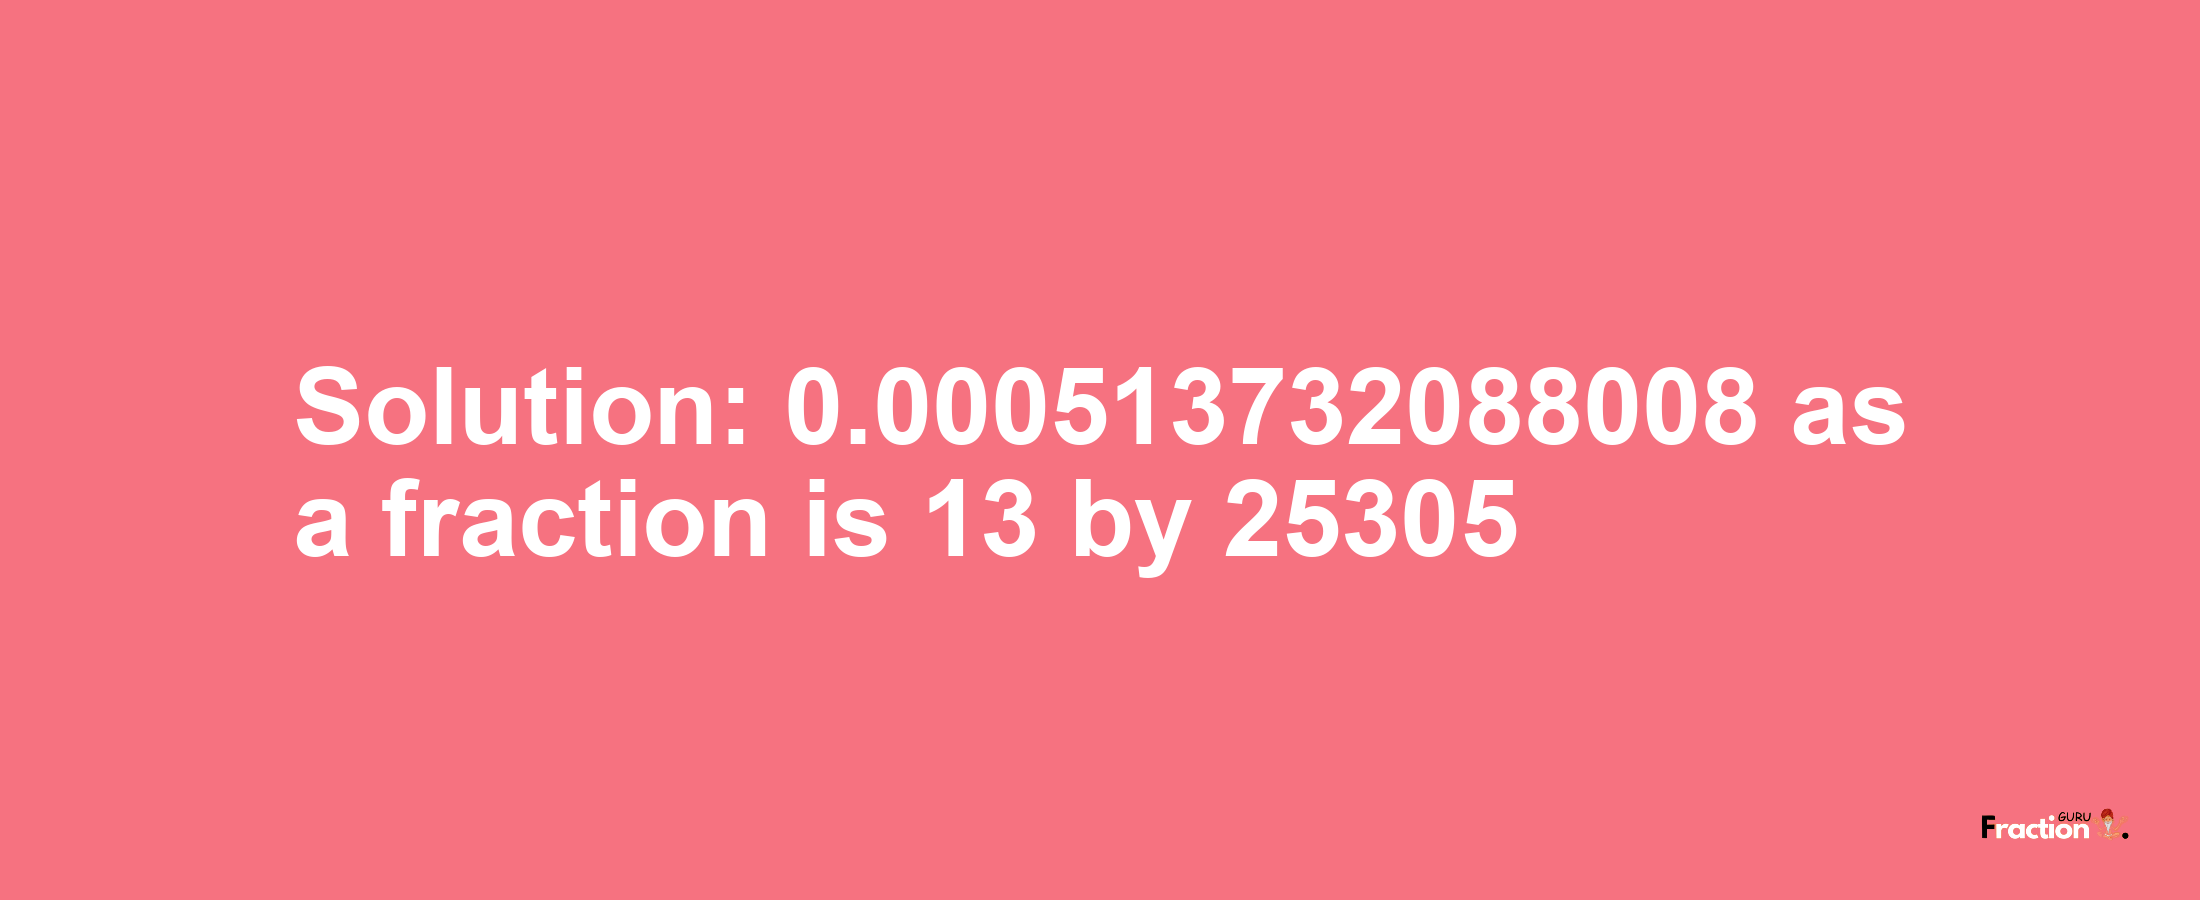 Solution:0.000513732088008 as a fraction is 13/25305